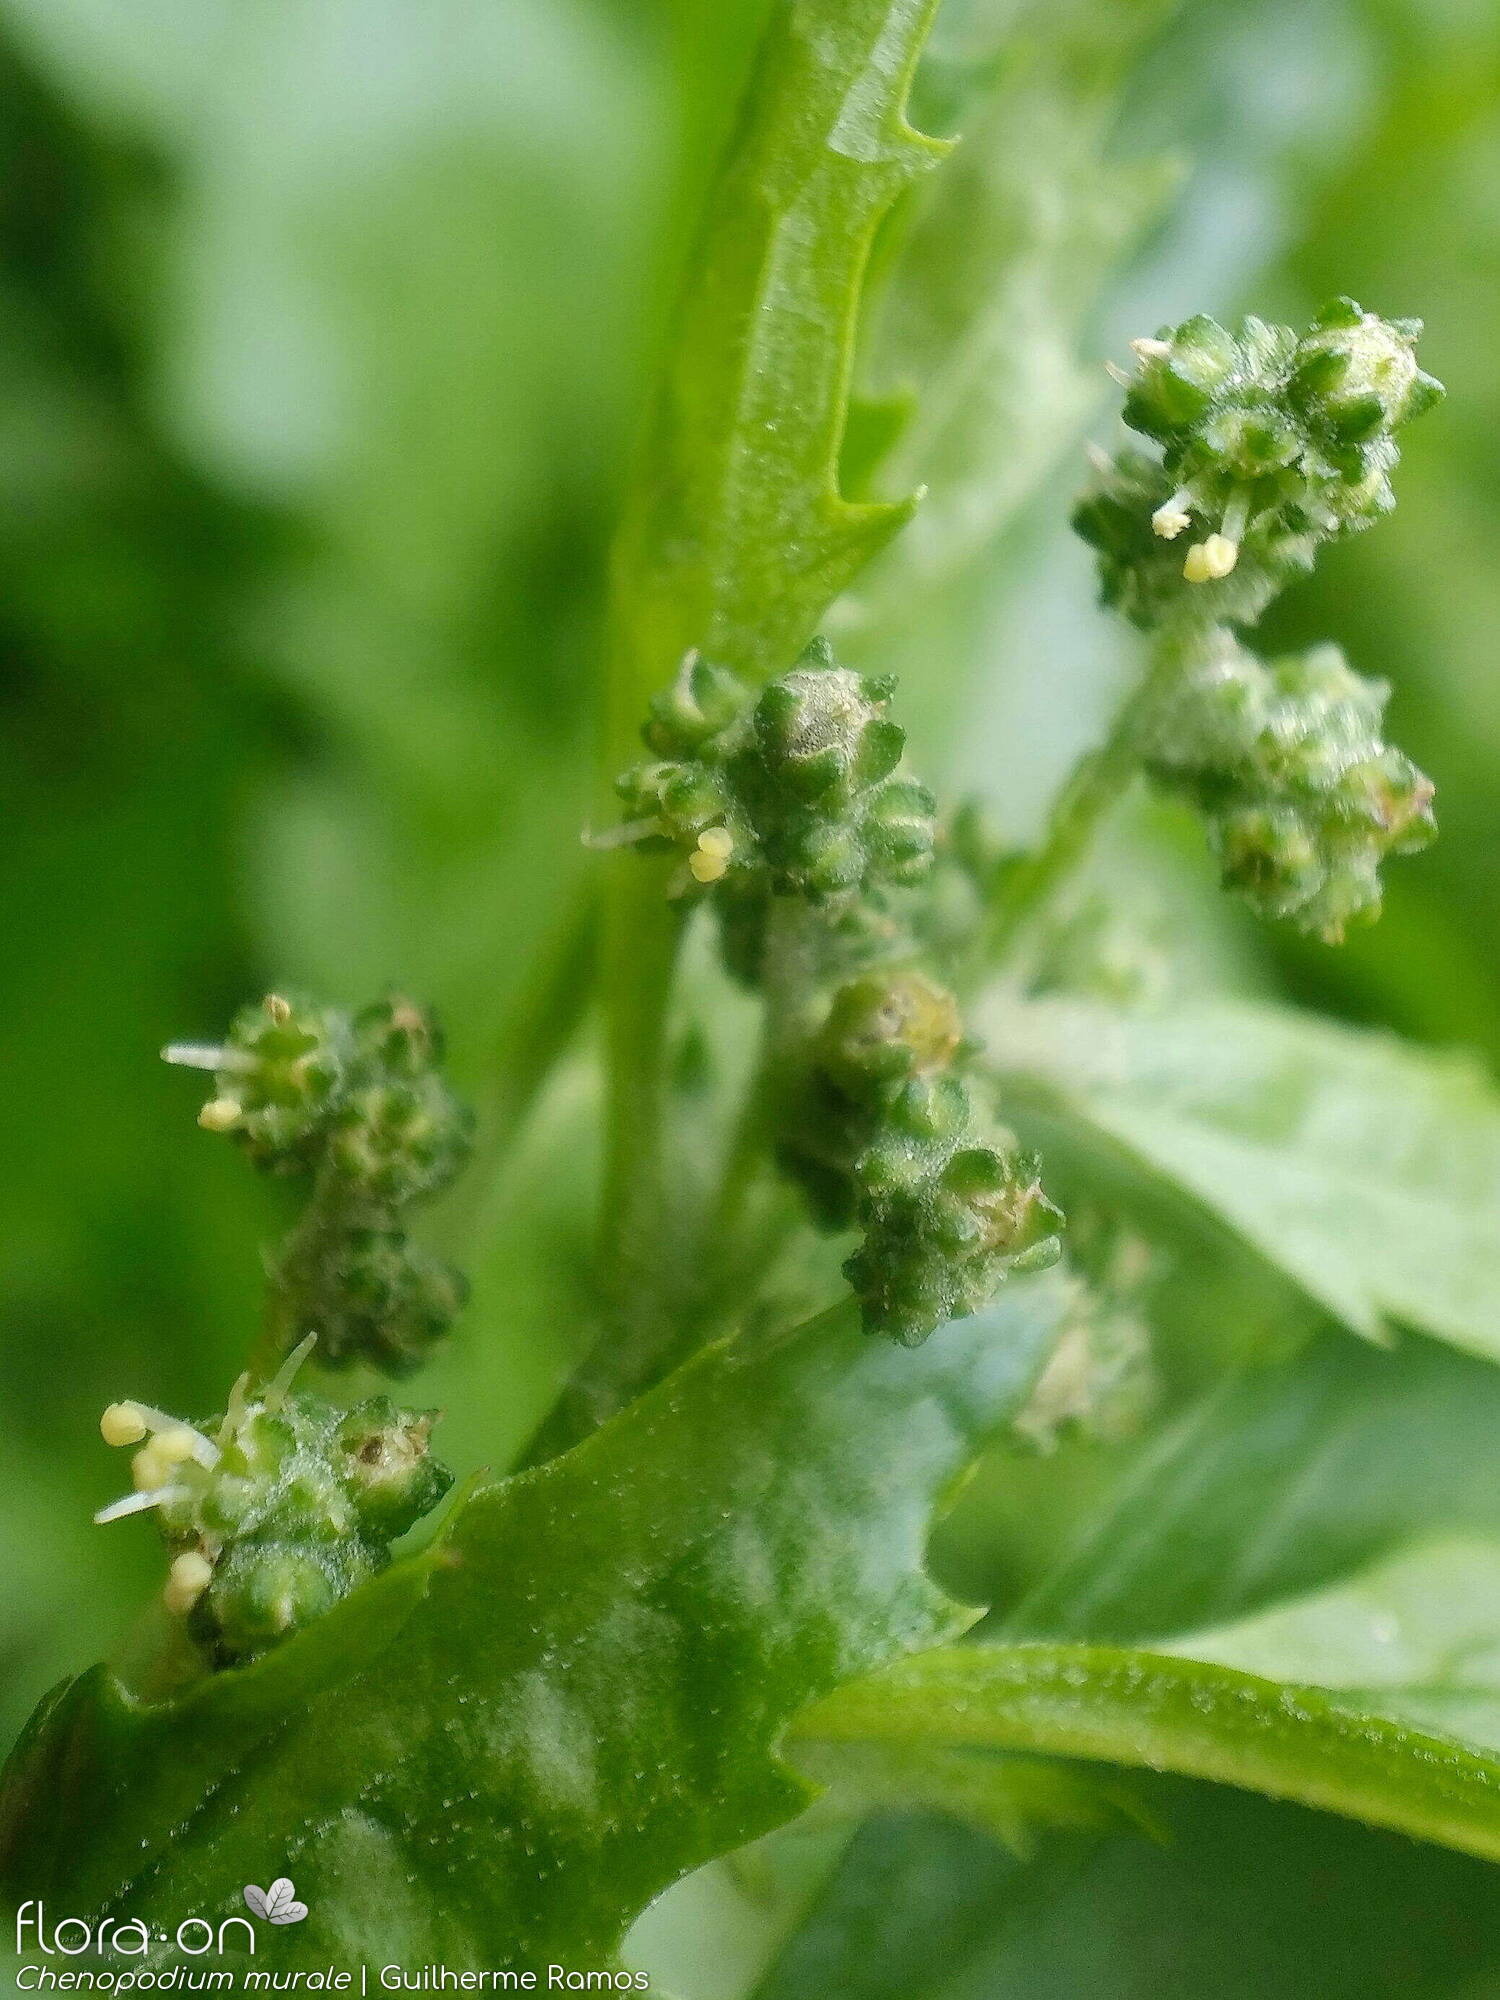 Chenopodium murale - Flor (geral) | Guilherme Ramos; CC BY-NC 4.0